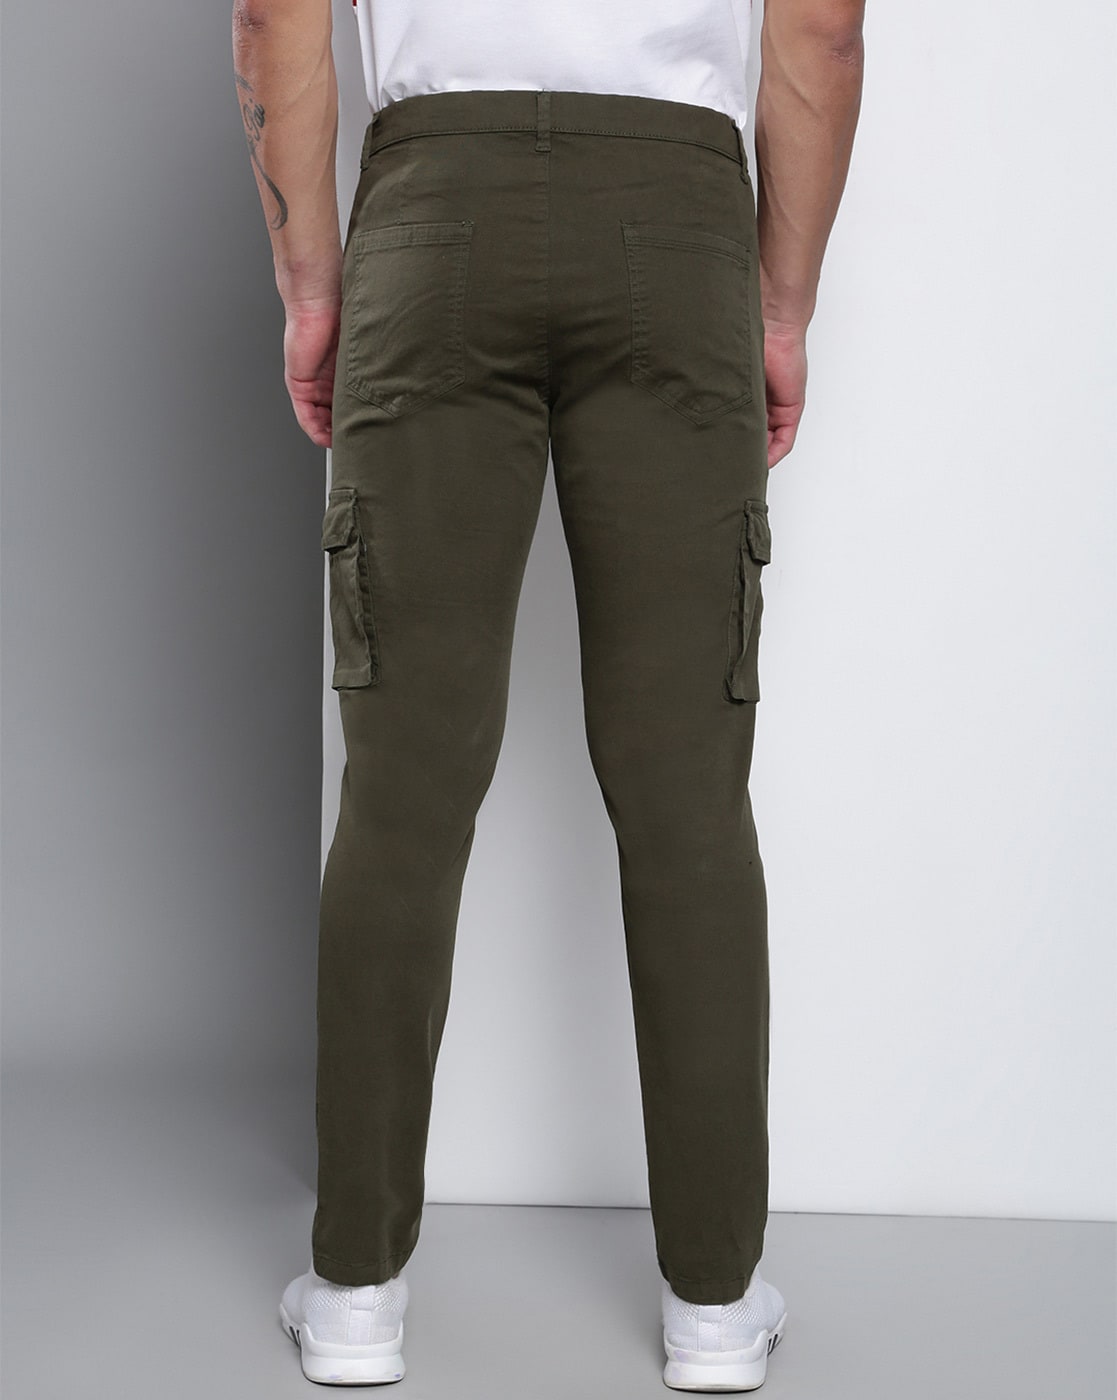 FALIZA Military Style Tactical Brown Cargo Pants Men For Men Multi Pockets,  Straight Style, Plus Size Cotton Outwear PA49 201128 From Cong04, $27.15 |  DHgate.Com